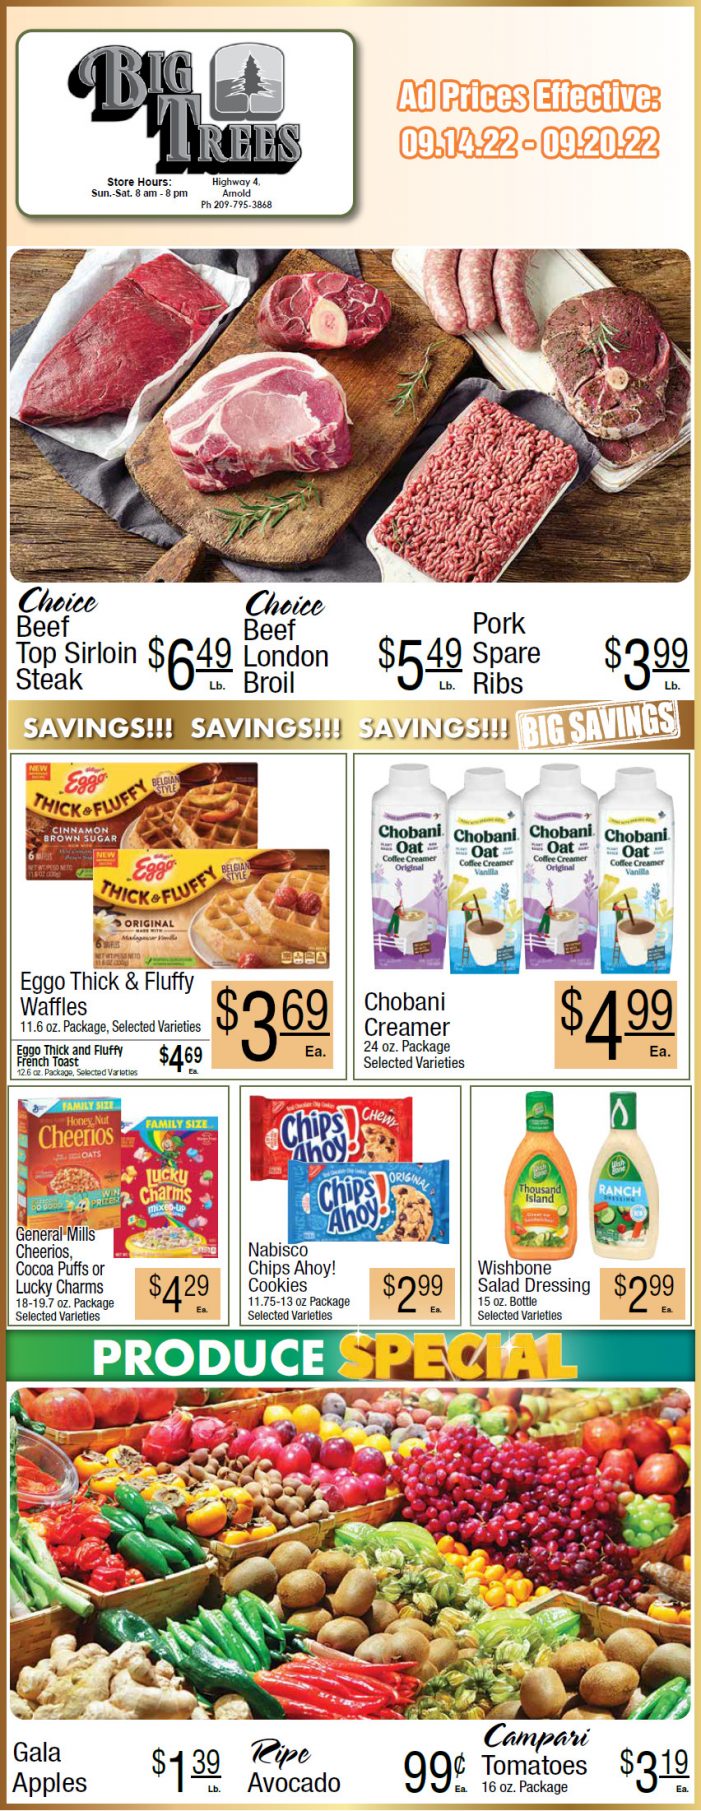 Big Trees Market Weekly Ad & Grocery Specials Sept 14 – 20!  Shop Local & Save!!